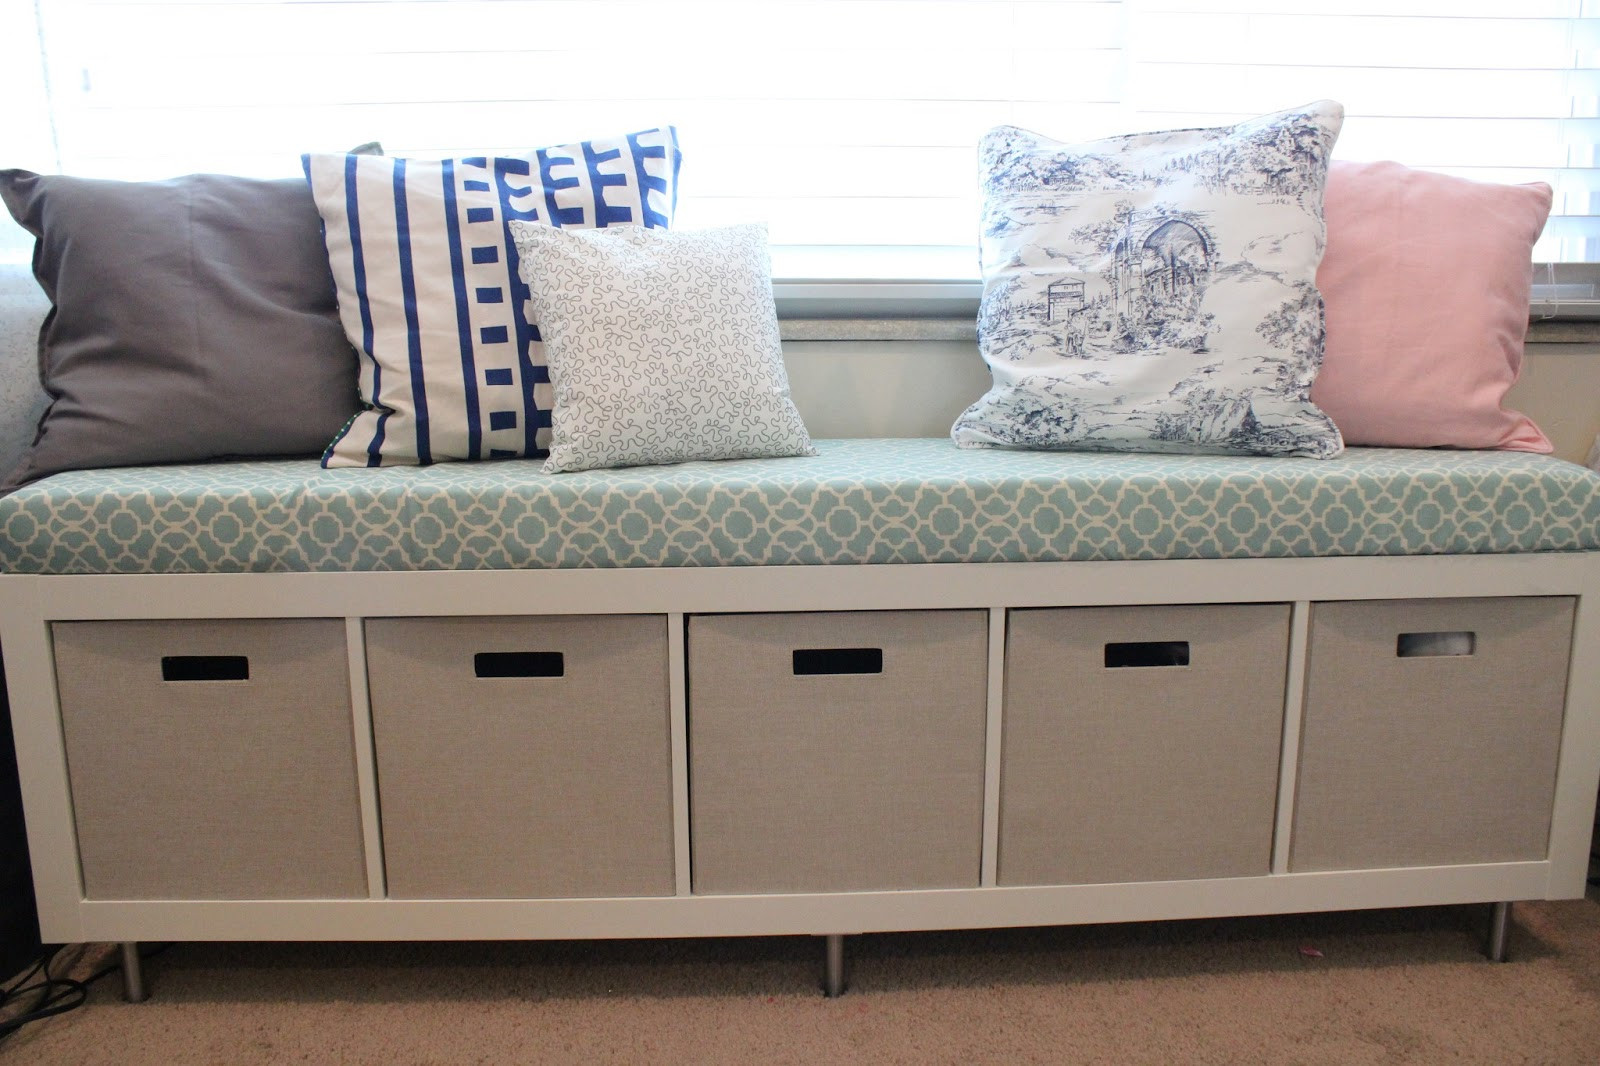 Bedroom Storage Bench Ikea
 Mommy Vignettes Ikea Window Bench Storage Containers